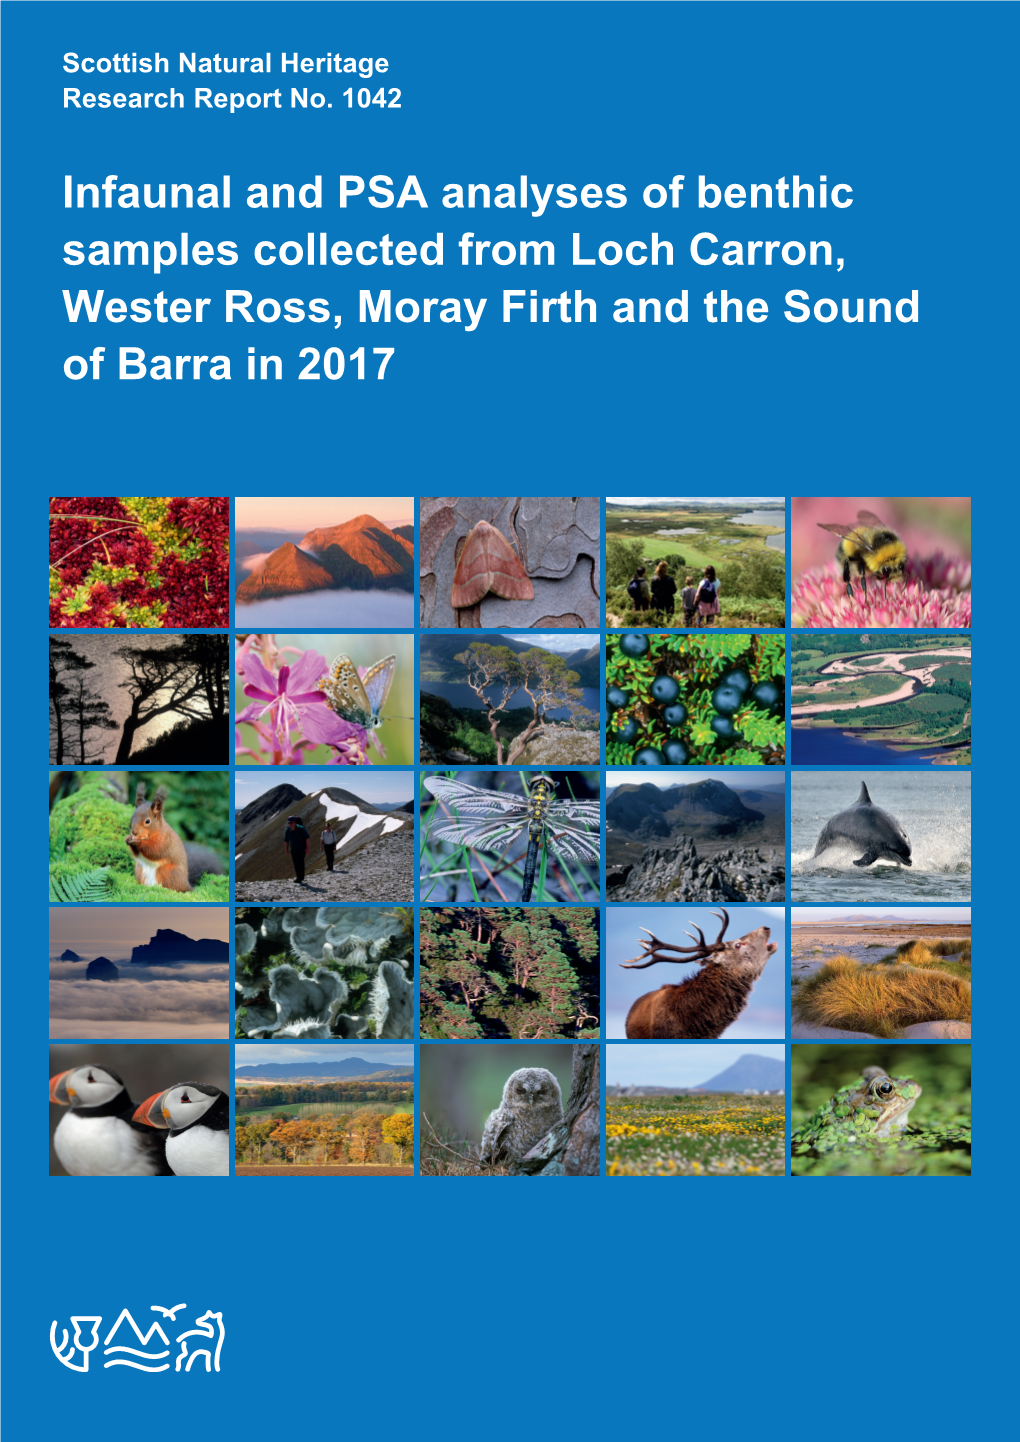 SNH Research Report 1042: Infaunal and PSA Analyses of Benthic Samples Collected from Loch Carron, Wester Ross, Moray Firth